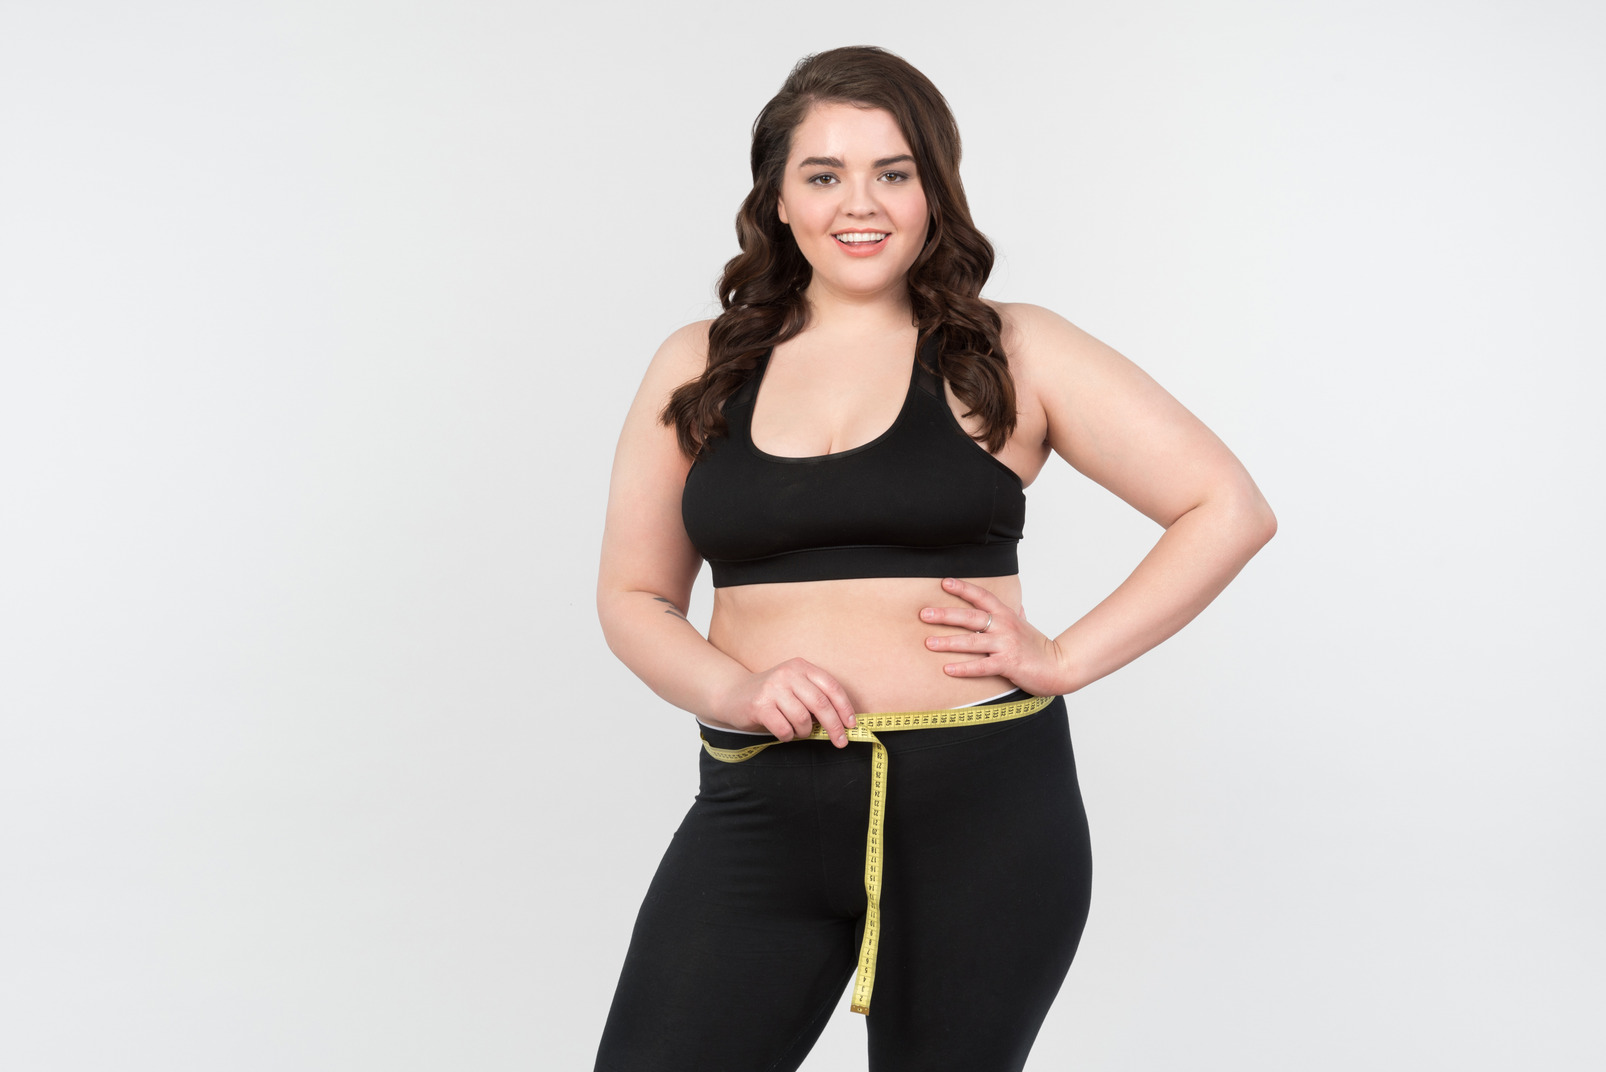 Smiling young plus-size model measuring her waist